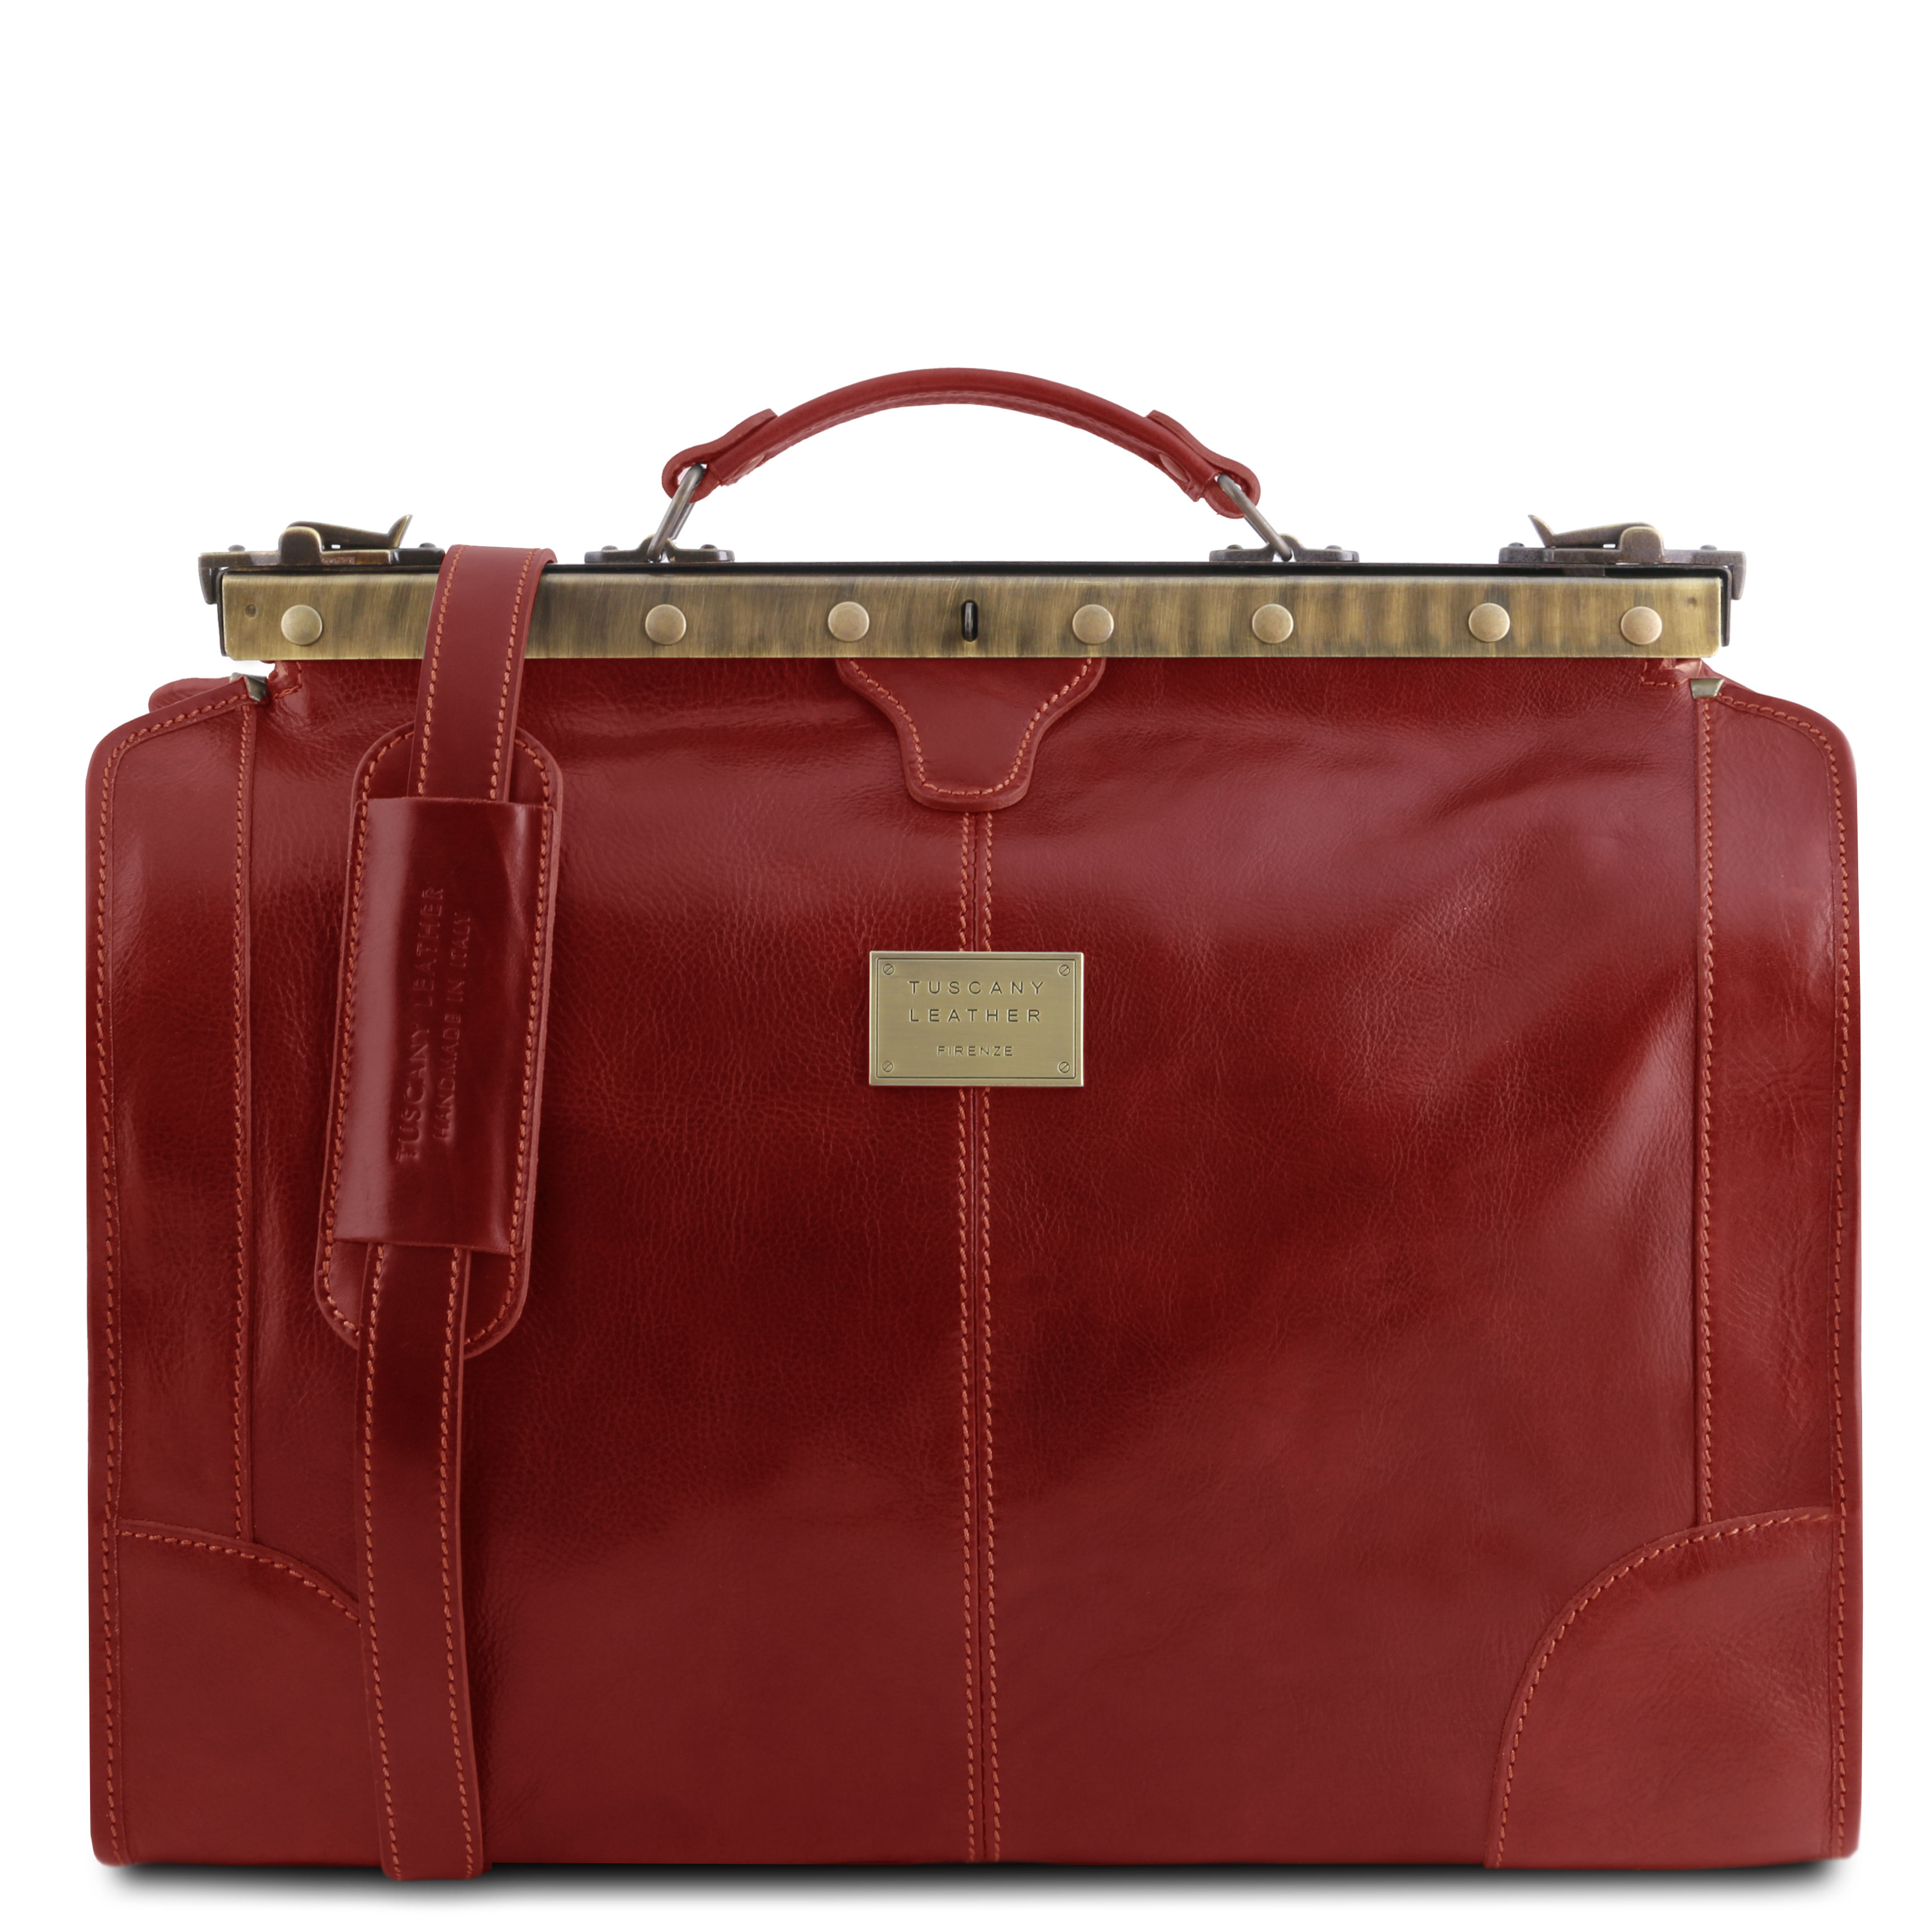 Madrid Gladstone Leather Bag - Small size Red